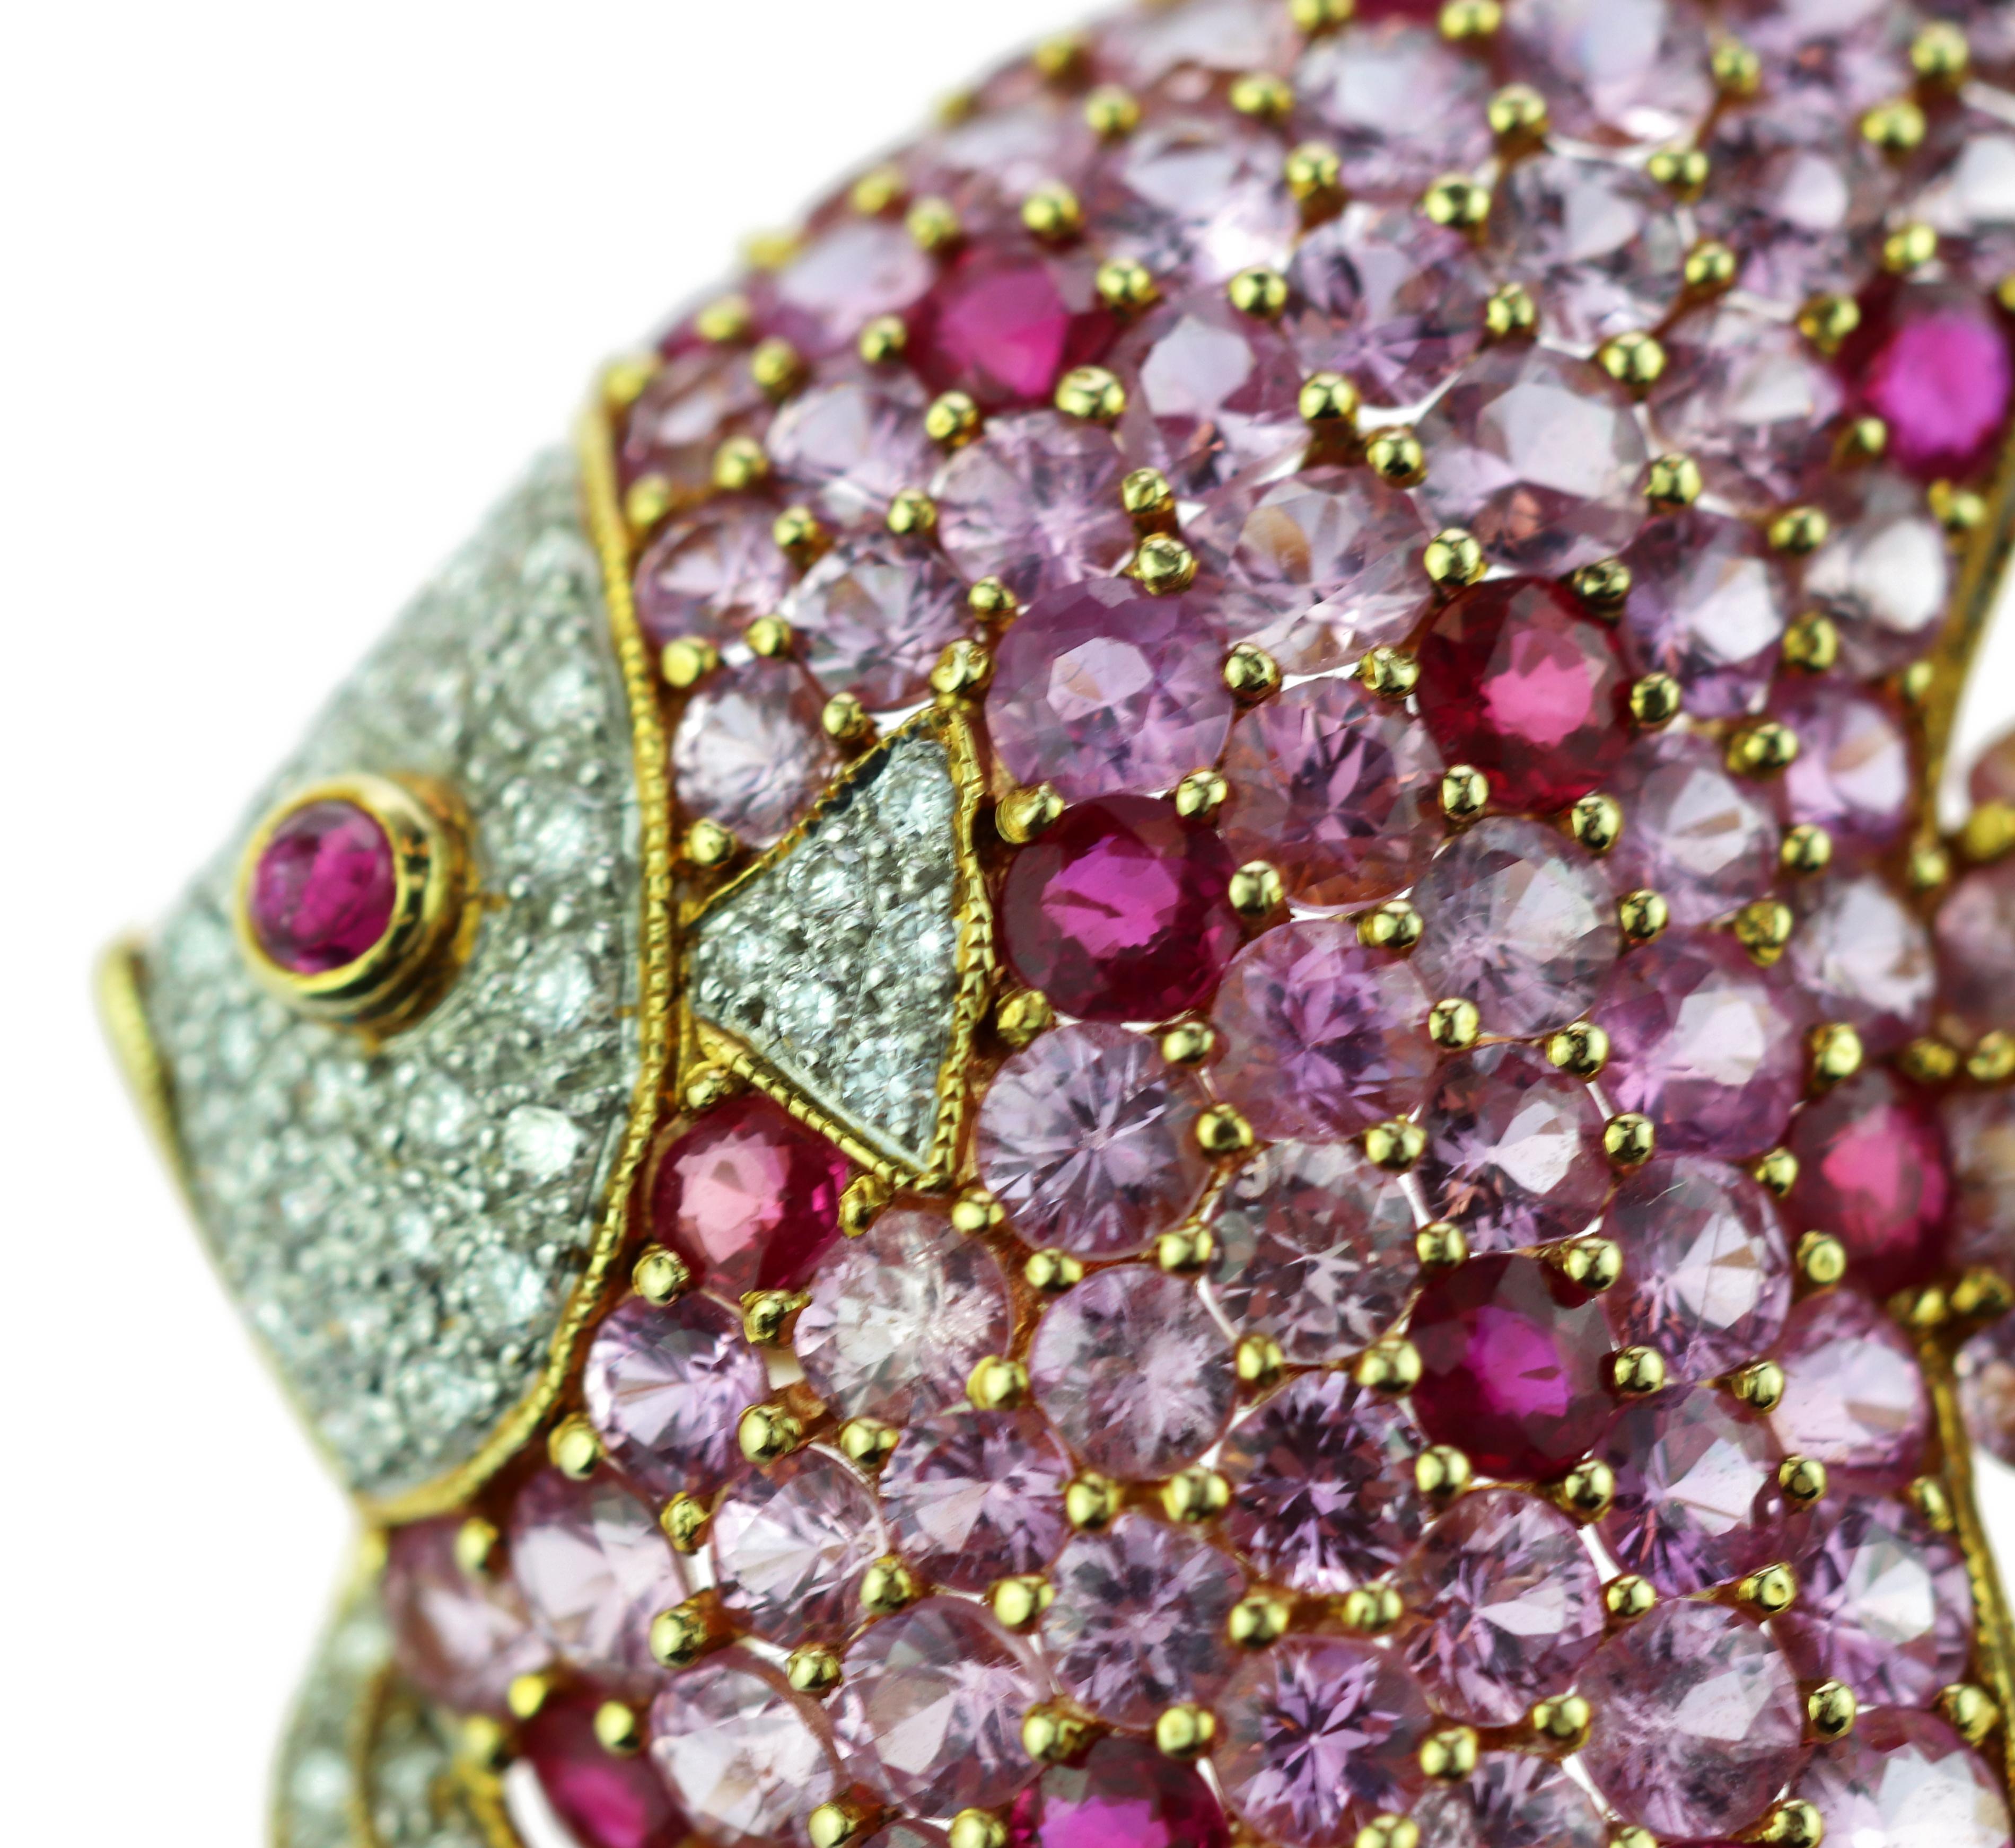 Grandiose and unique brooch modeled in the shape of a pink fish and embellished with pavé of sapphires, diamonds and a rubies.

This brooch is inspired by the tale of The Fisherman and the Fish. The tale is about a fisherman who manages to catch a